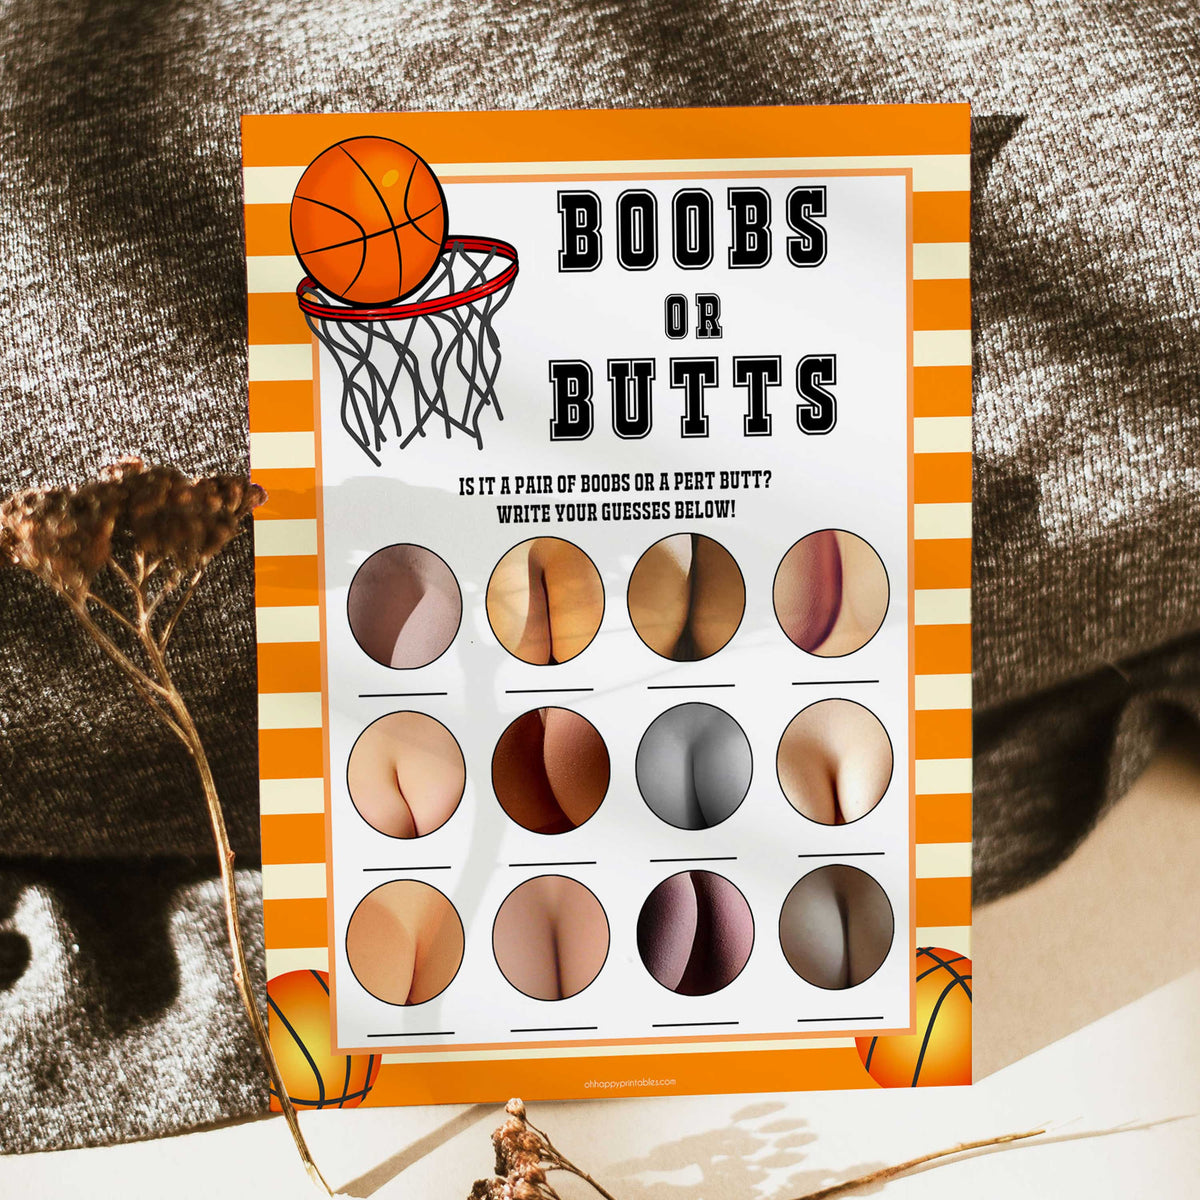 Basketball baby shower games, boobs or butts baby game, printable baby games, basket baby games, baby shower games, basketball baby shower idea, fun baby games, popular baby games